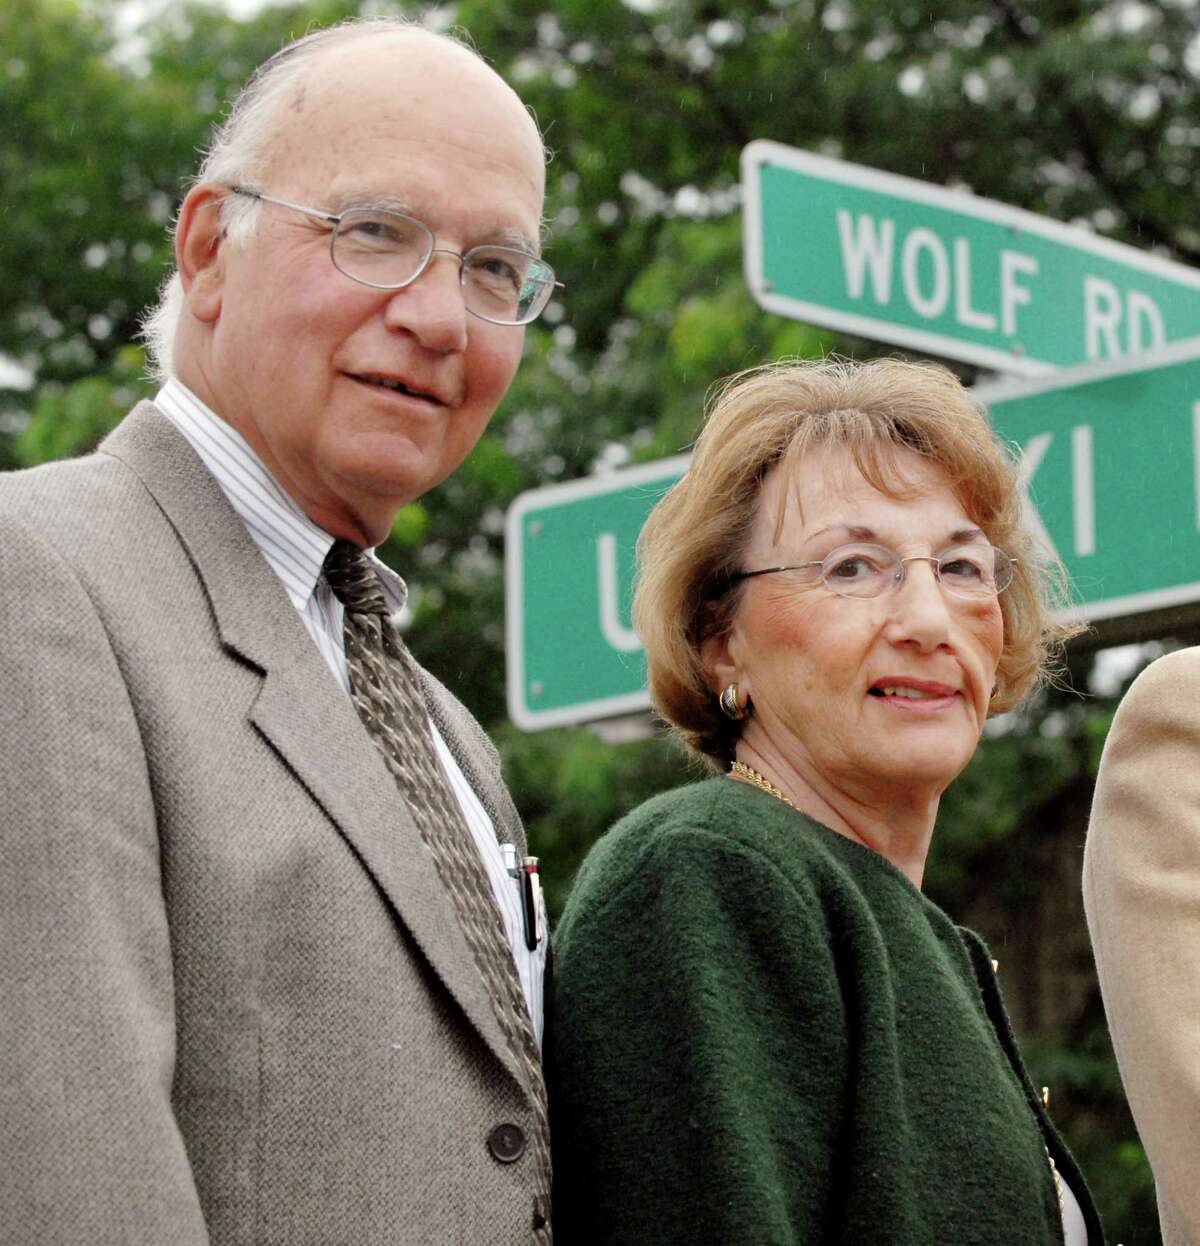 Peter and Jean Platt on Monday, Sept. 10 2007, on Wolf Rd. in Colonie, N.Y. (Will Waldron/Times Union